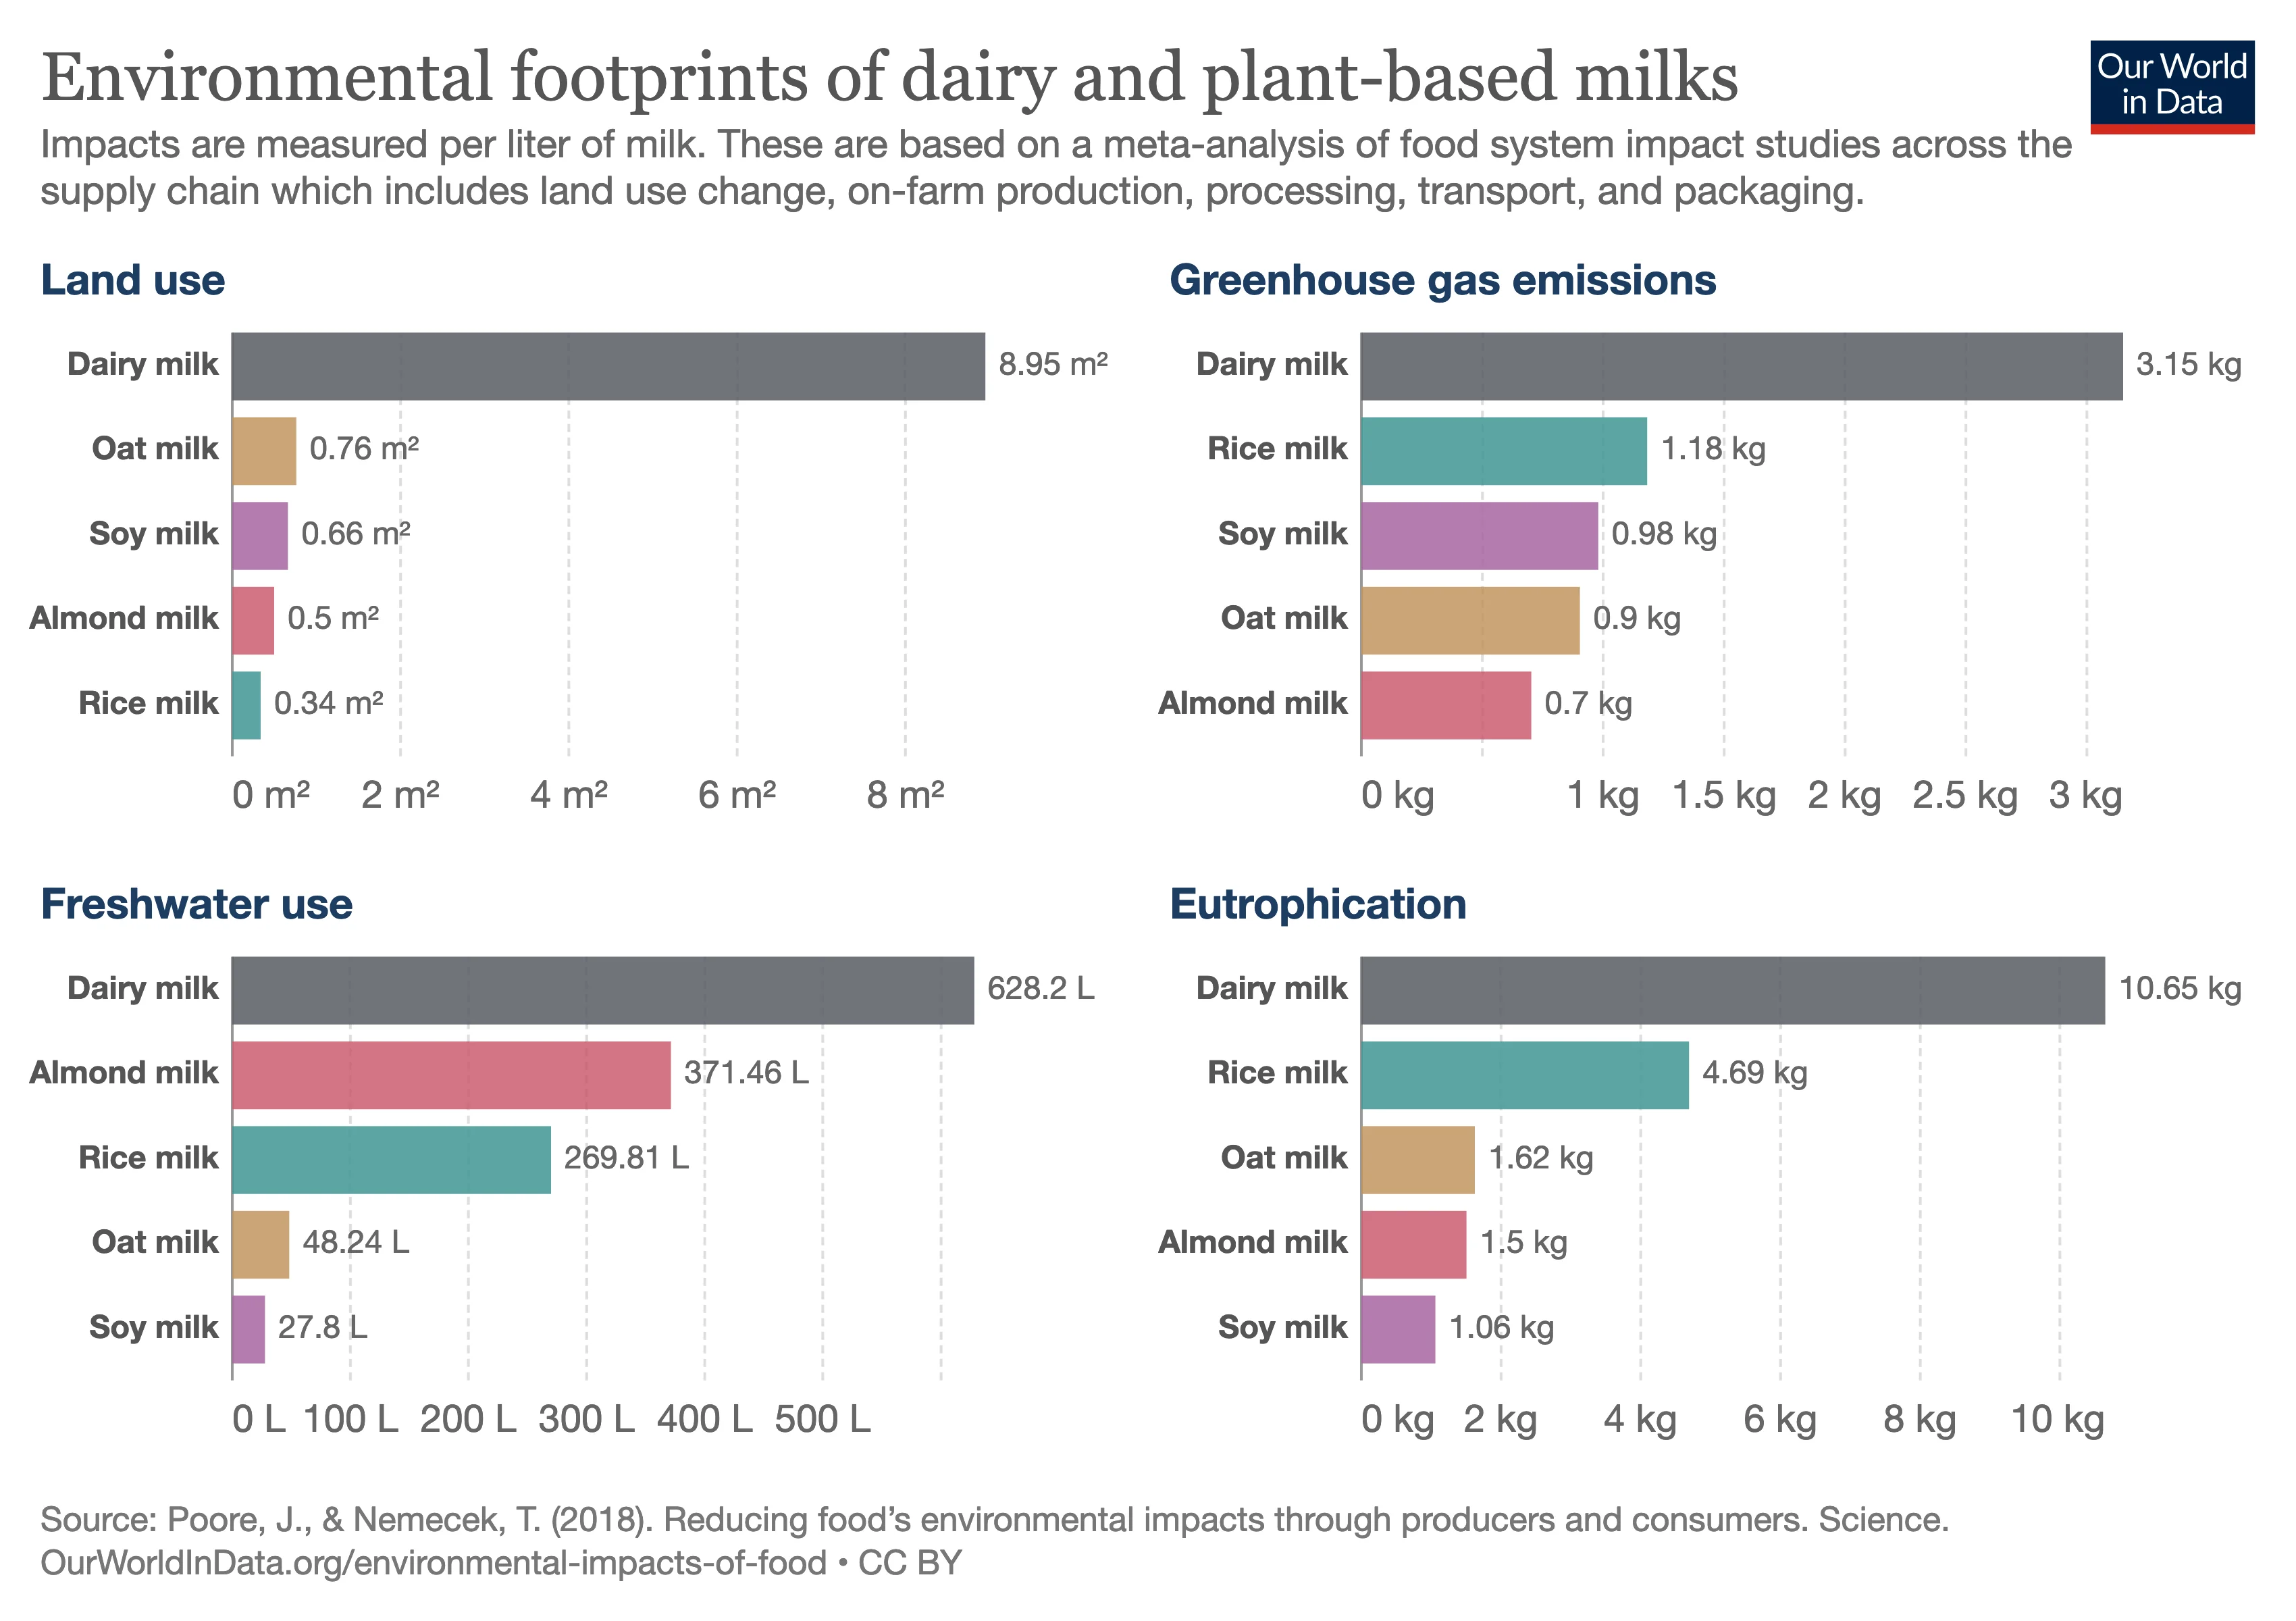 Environmental footprints of dairy and plant-based milks Impacts are measured per liter of milk. These are based on a meta-analysis of food system impact studies across the supplychain which includes land use change, on-farm production, processing, transport, and packaging.